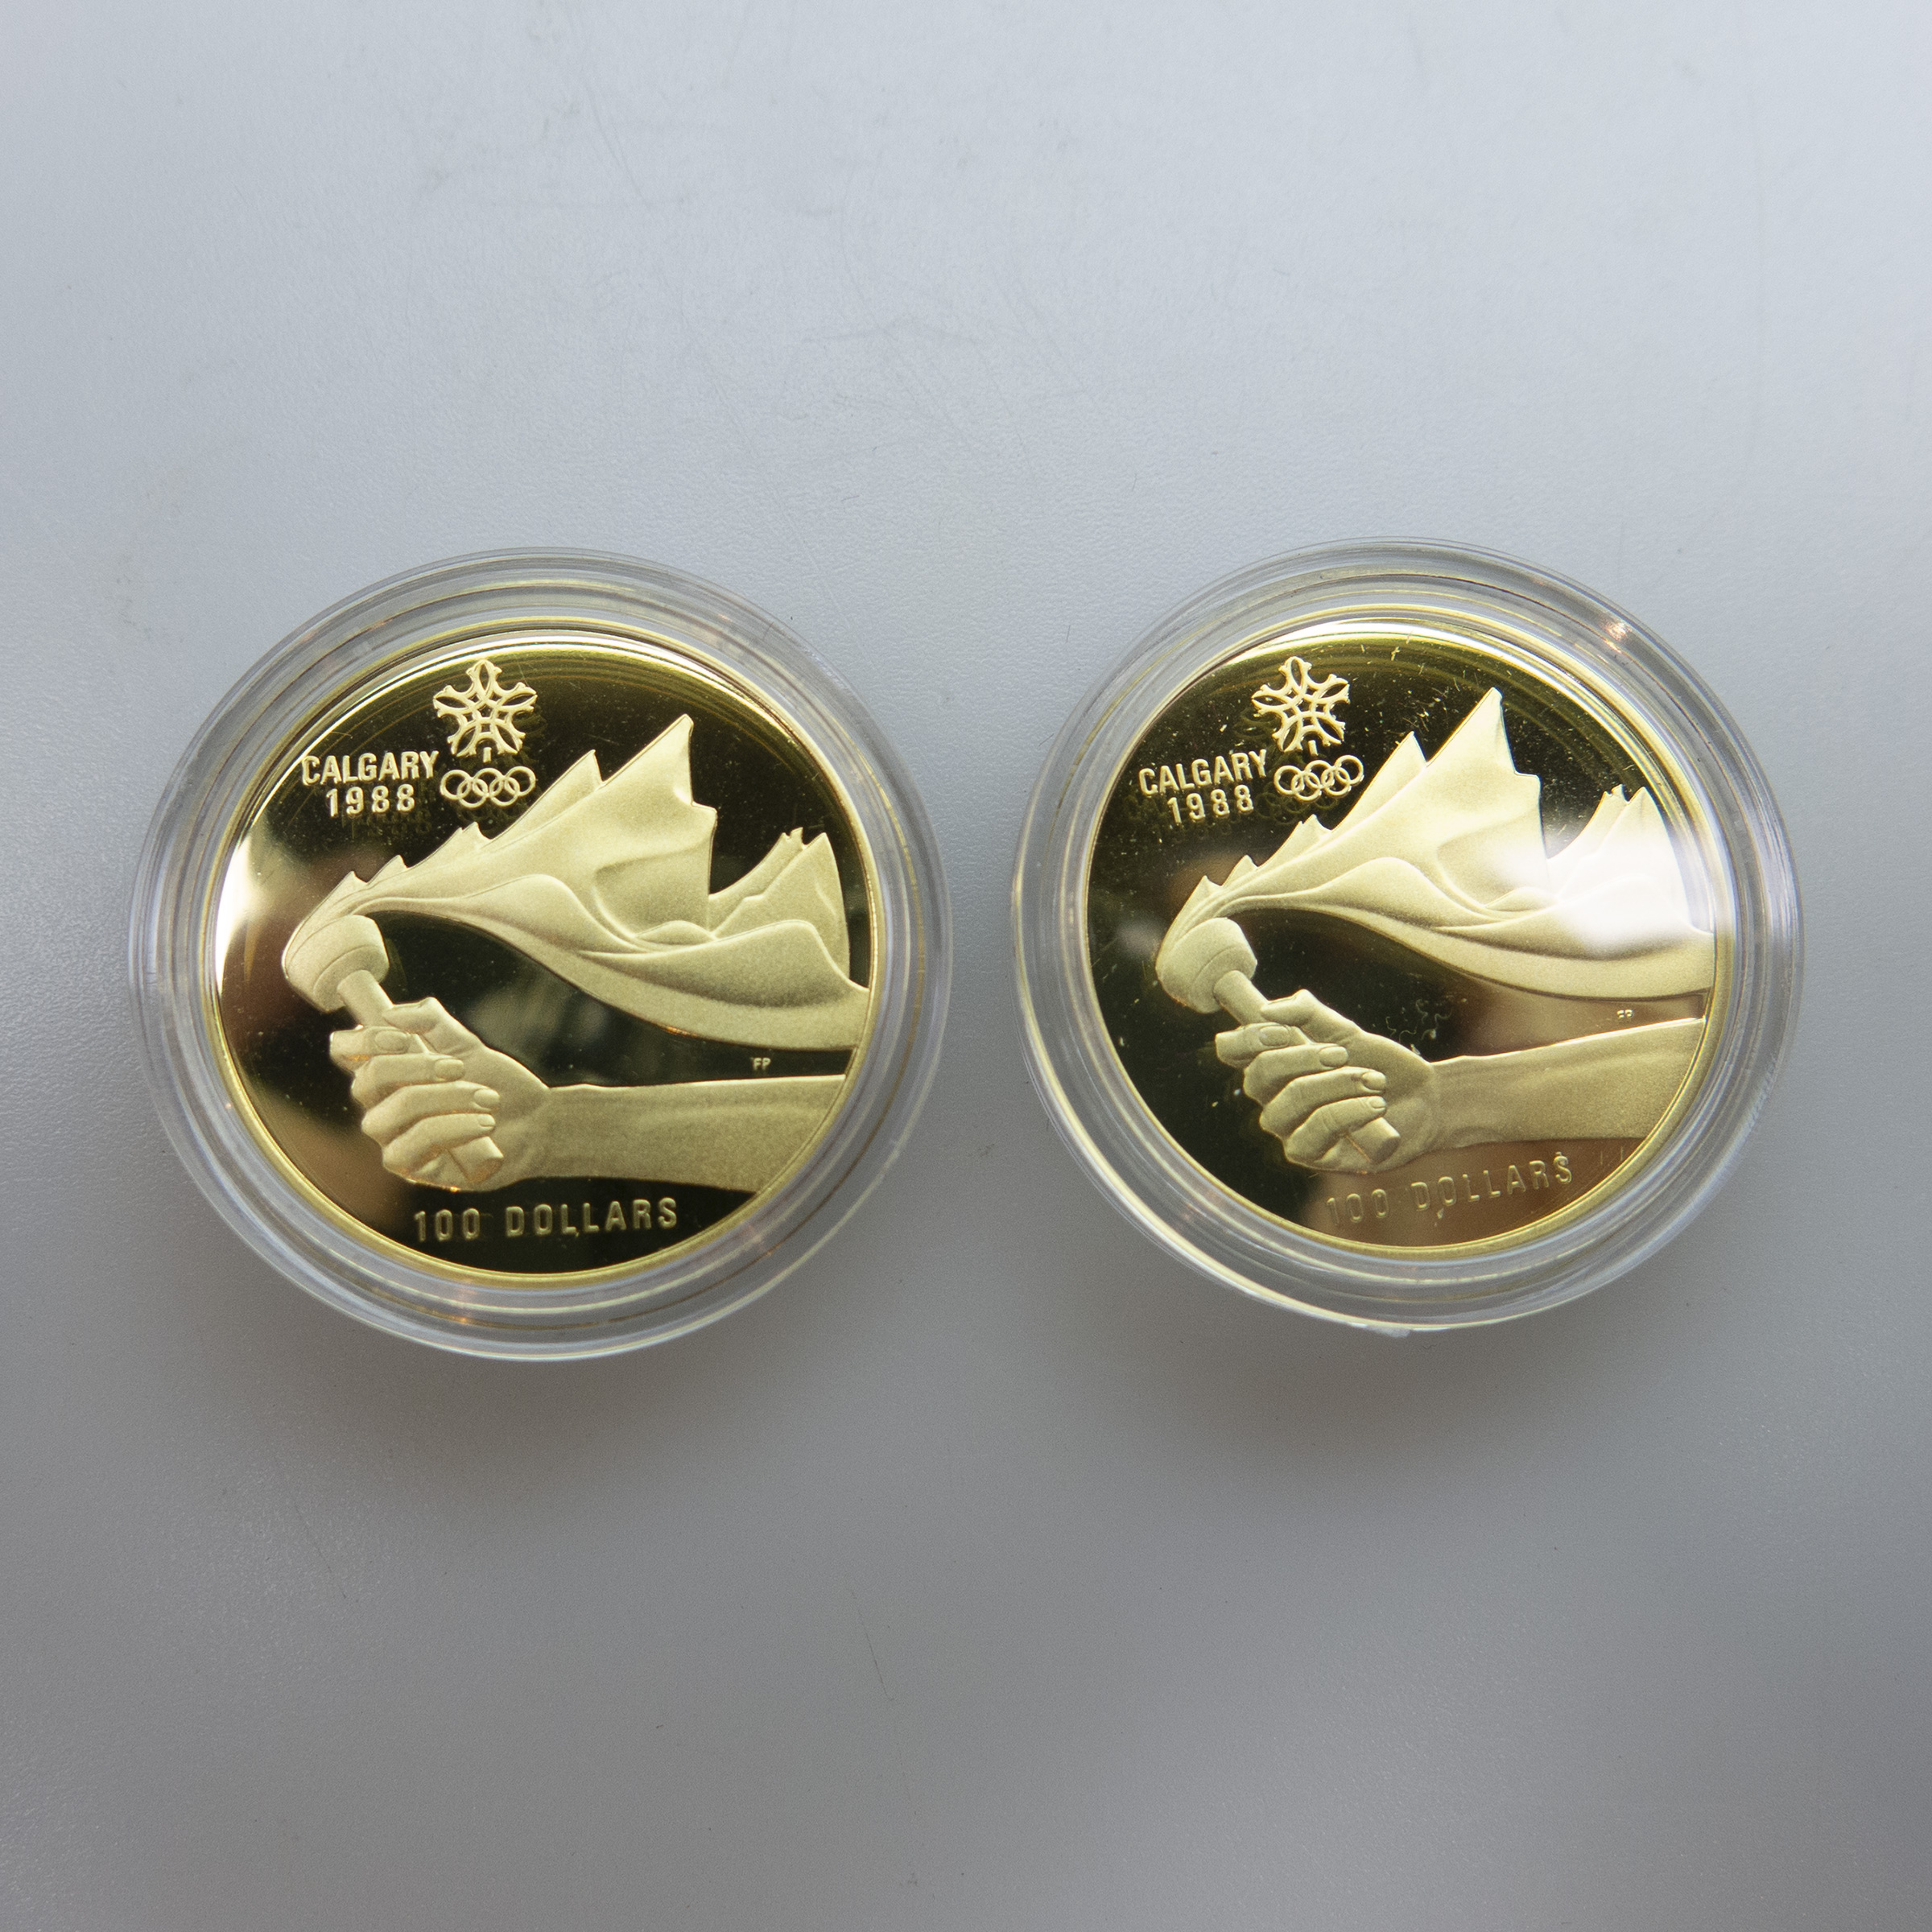 2 Canadian $100 Gold Coins